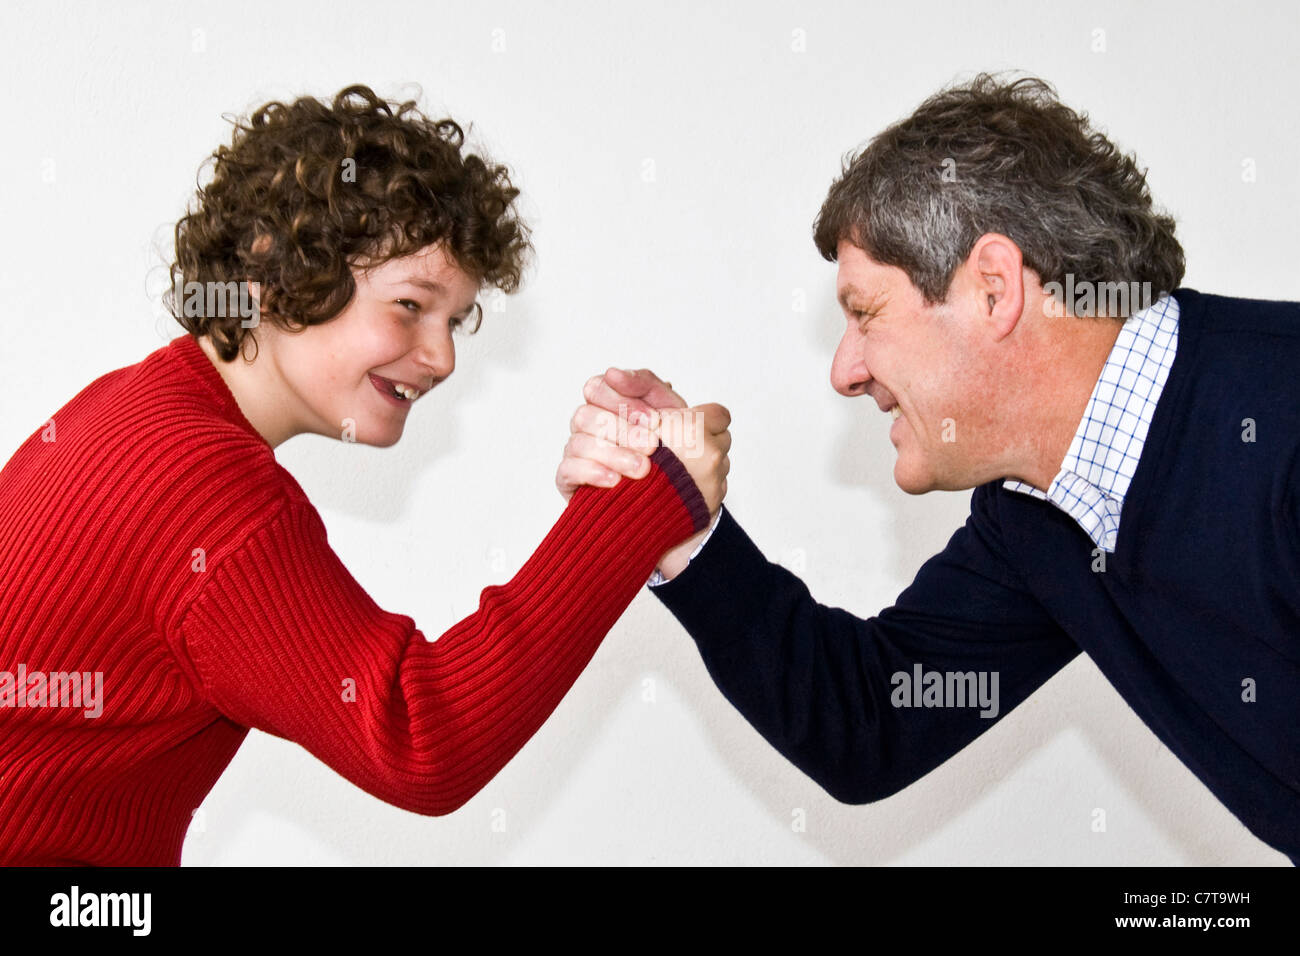 Father and son arm wrestling Stock Photo